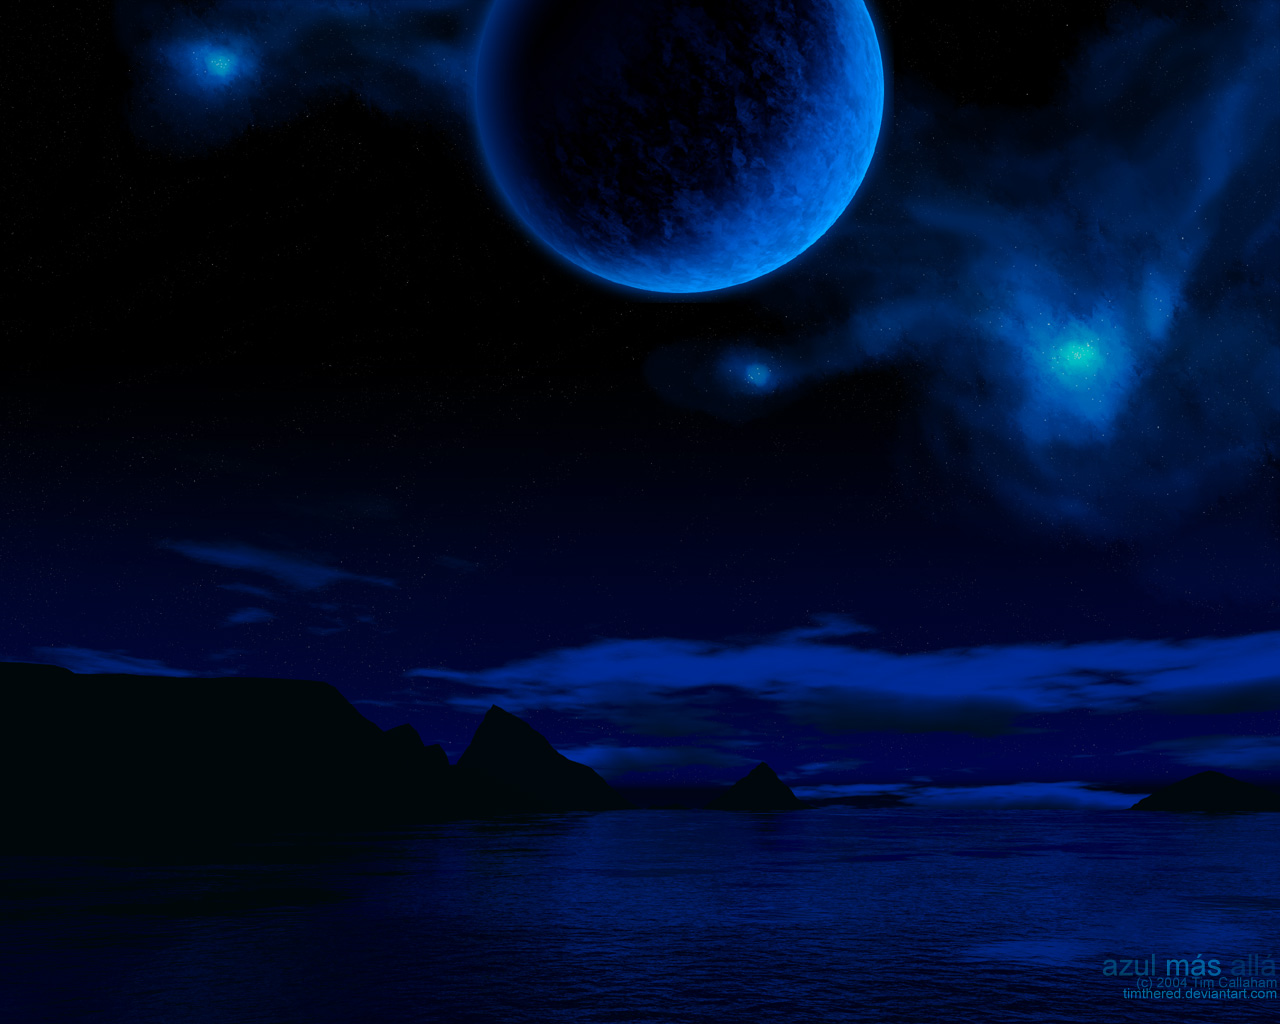  Planetscape HQ Background Wallpapers